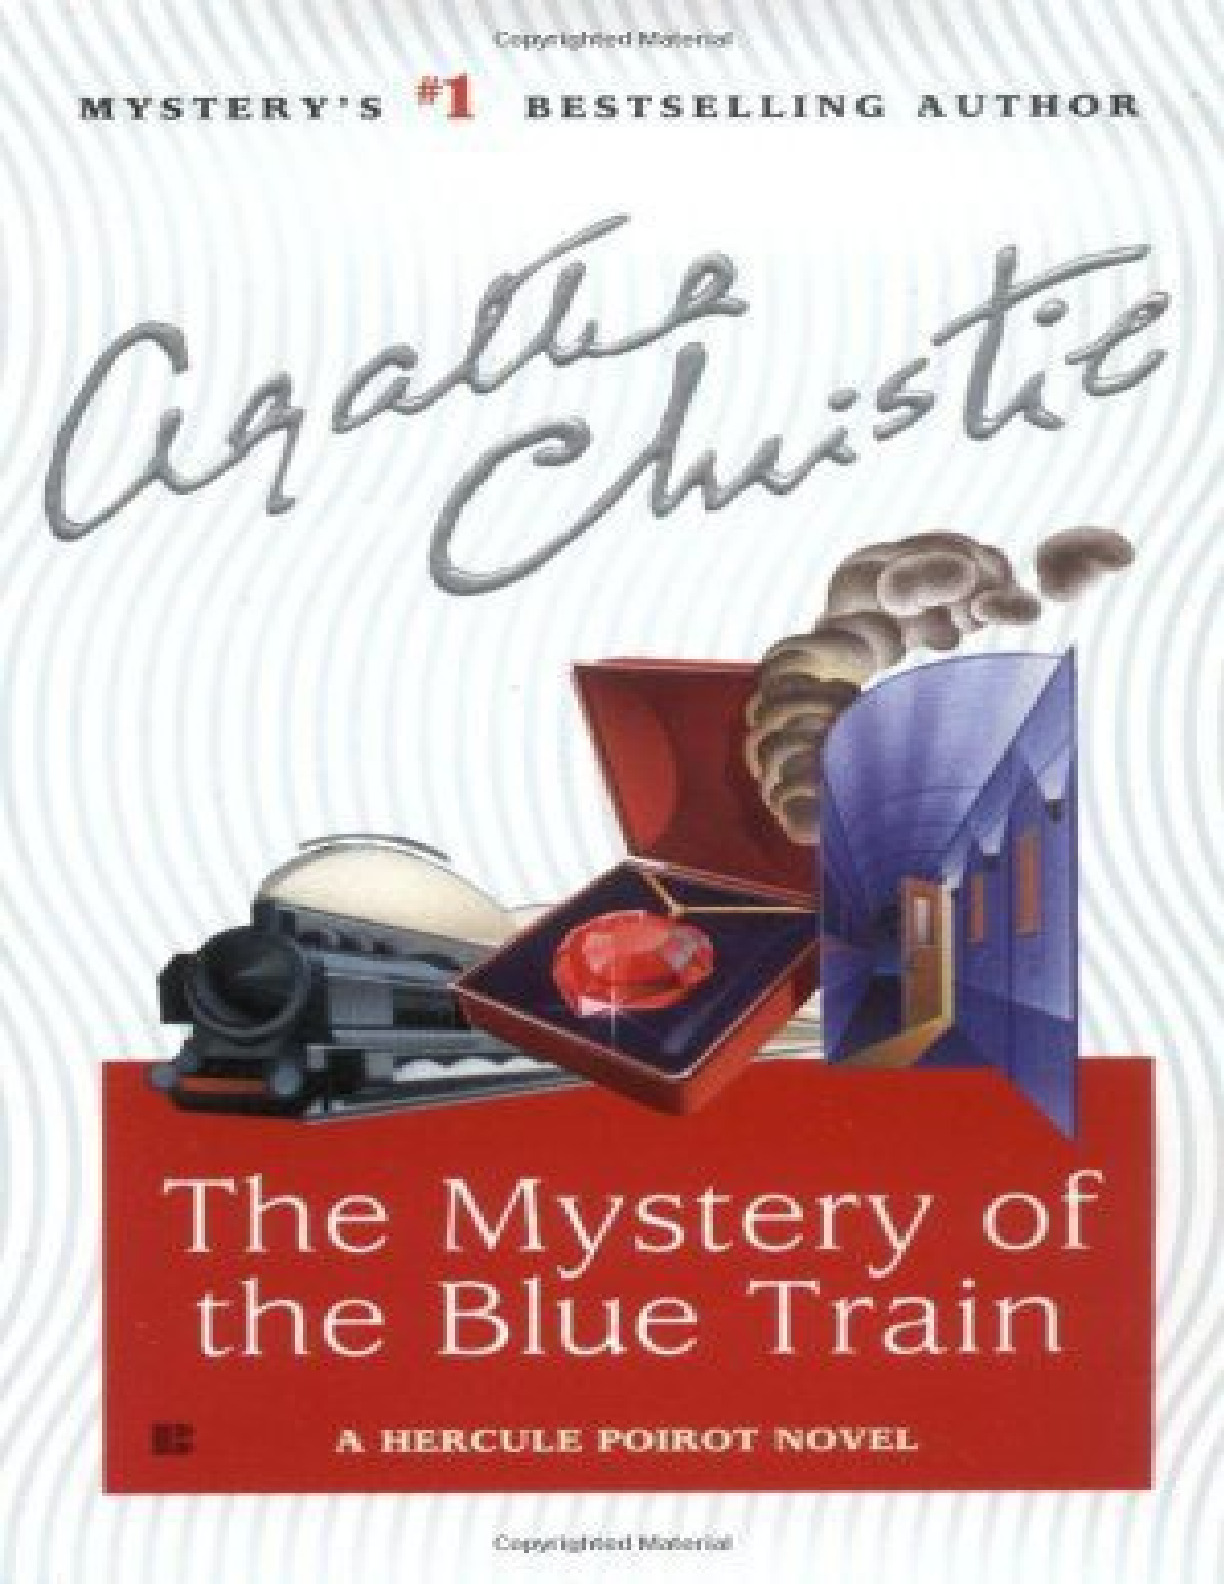 mystery of the blue train, The – Agatha Christie